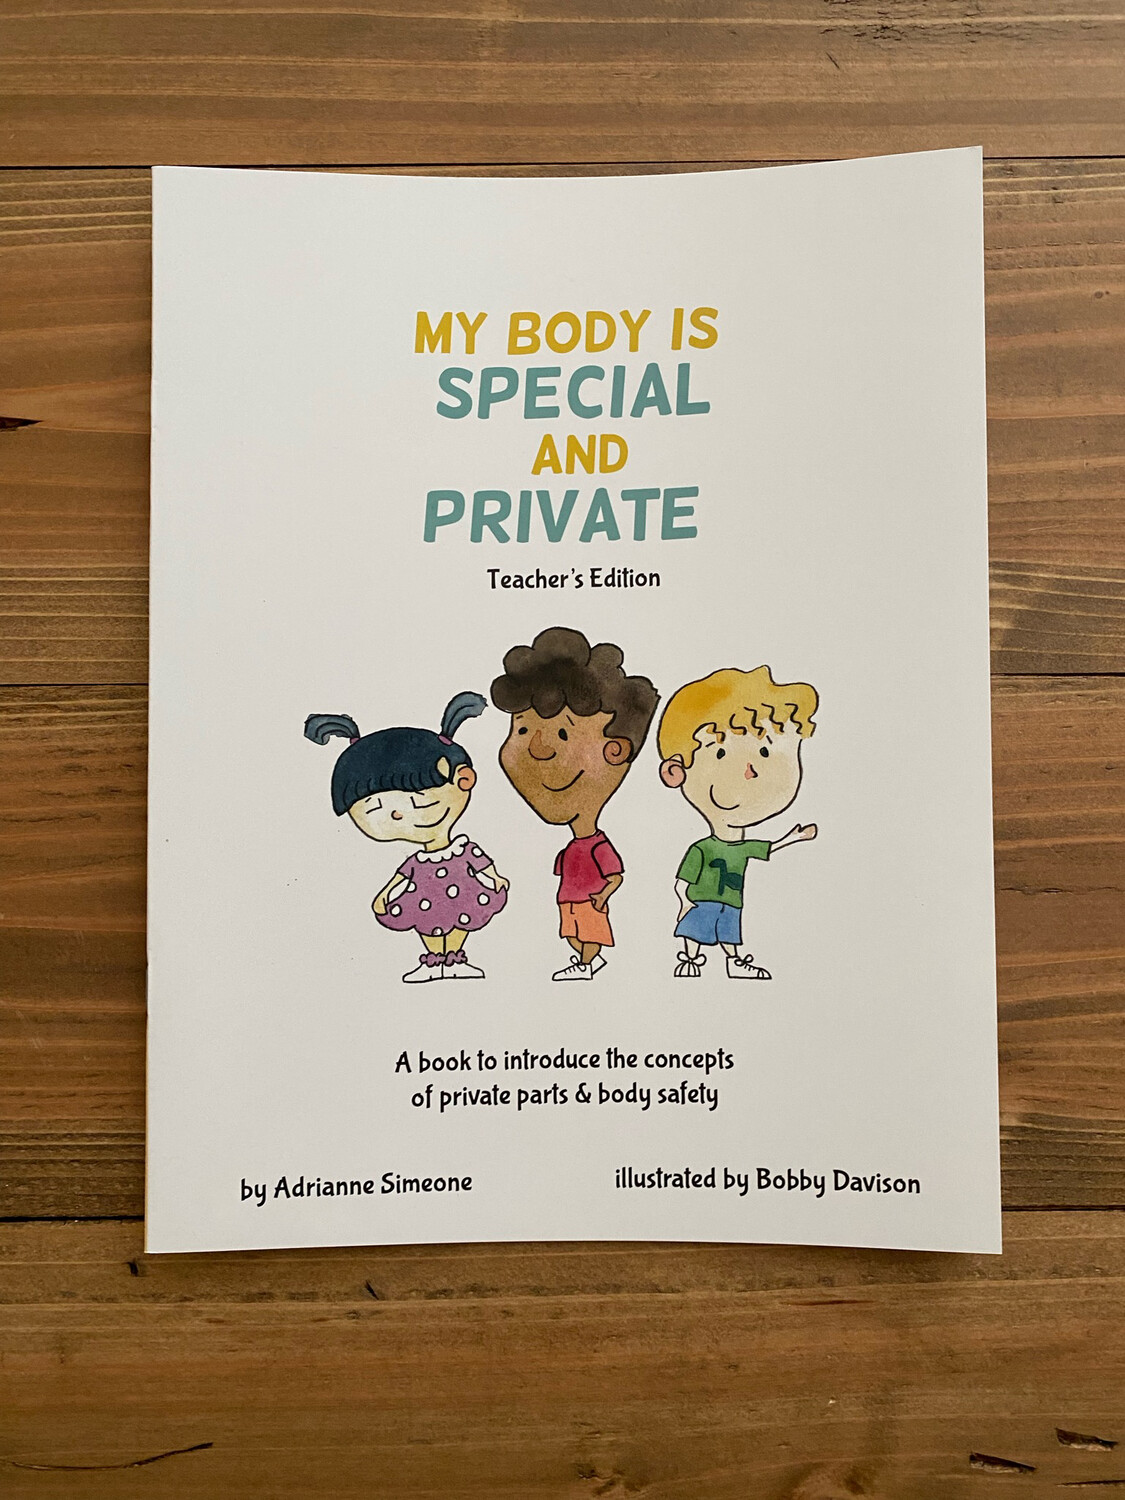 Teacher's Edition "My Body is Special and Private" - Book Only